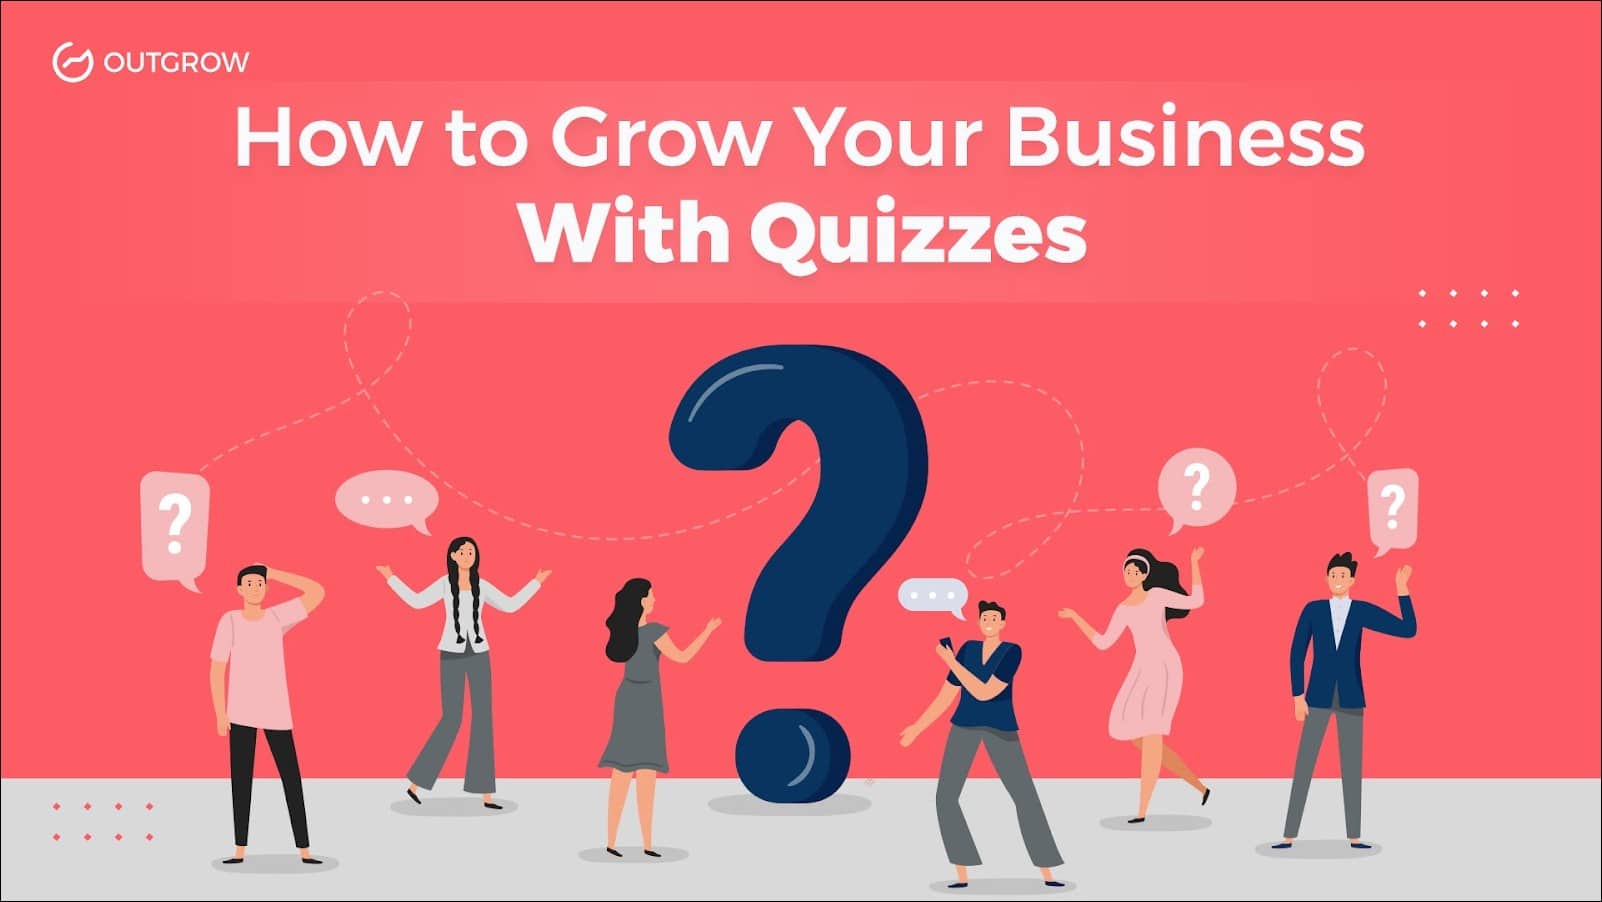 How to Grow Your Business With Quizzes